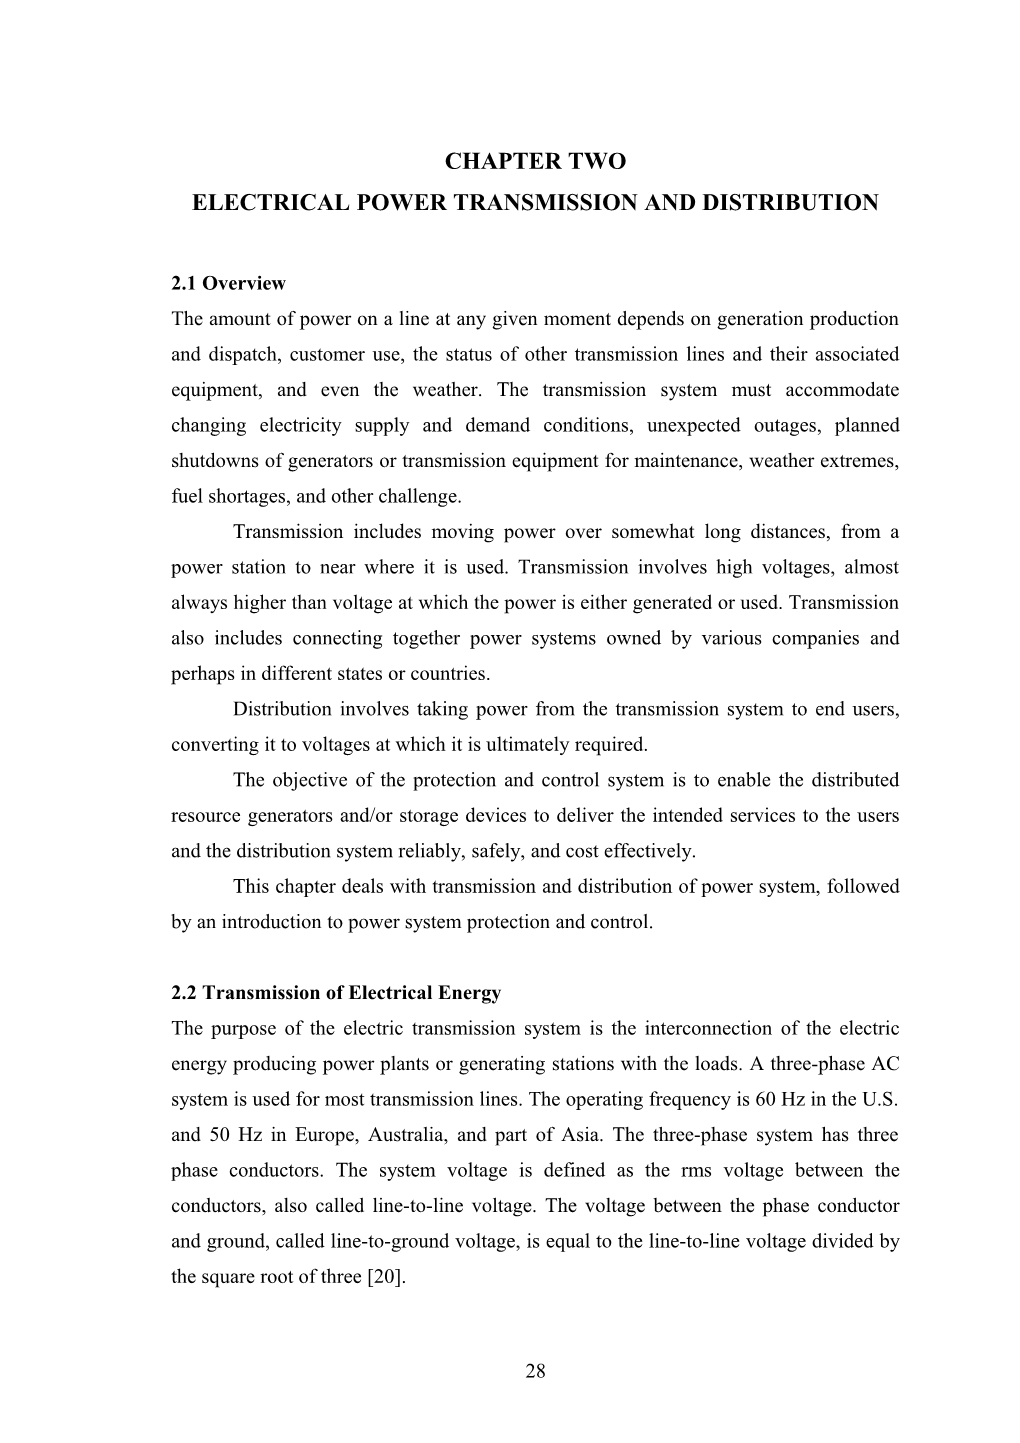 Electrical Power Transmission Anddistribution